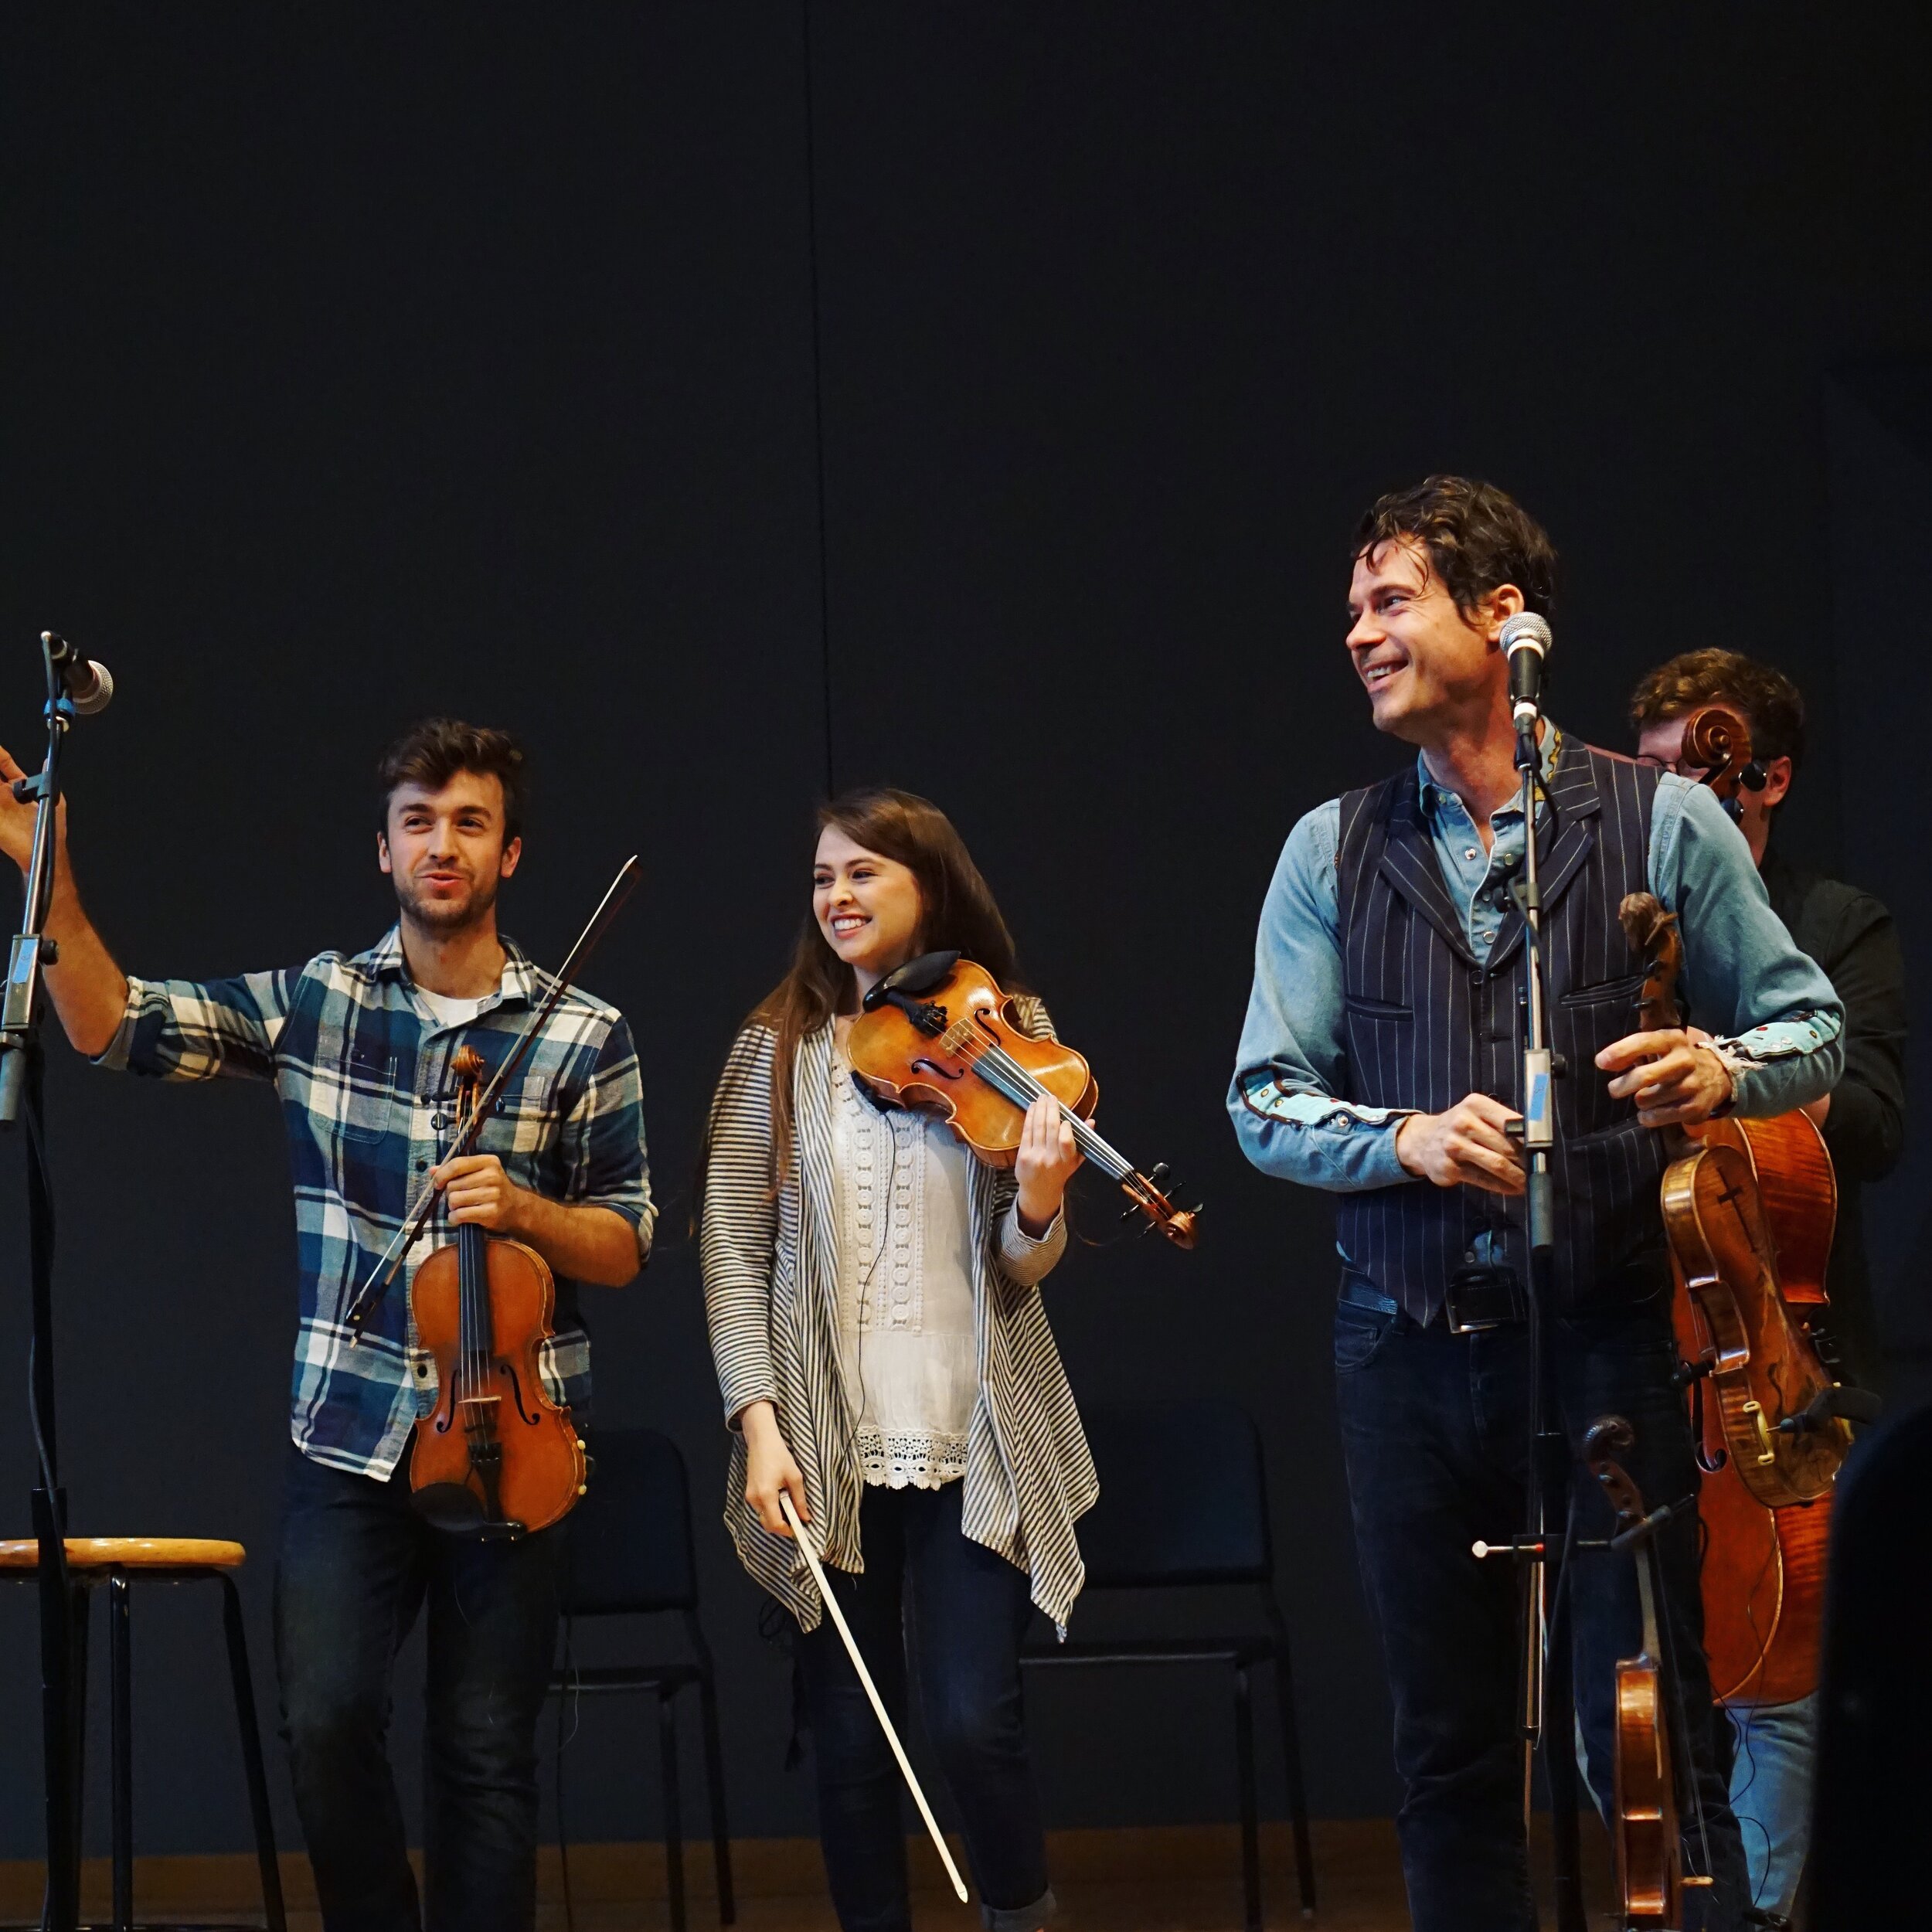 fiddle for Old Crow Medicine Show